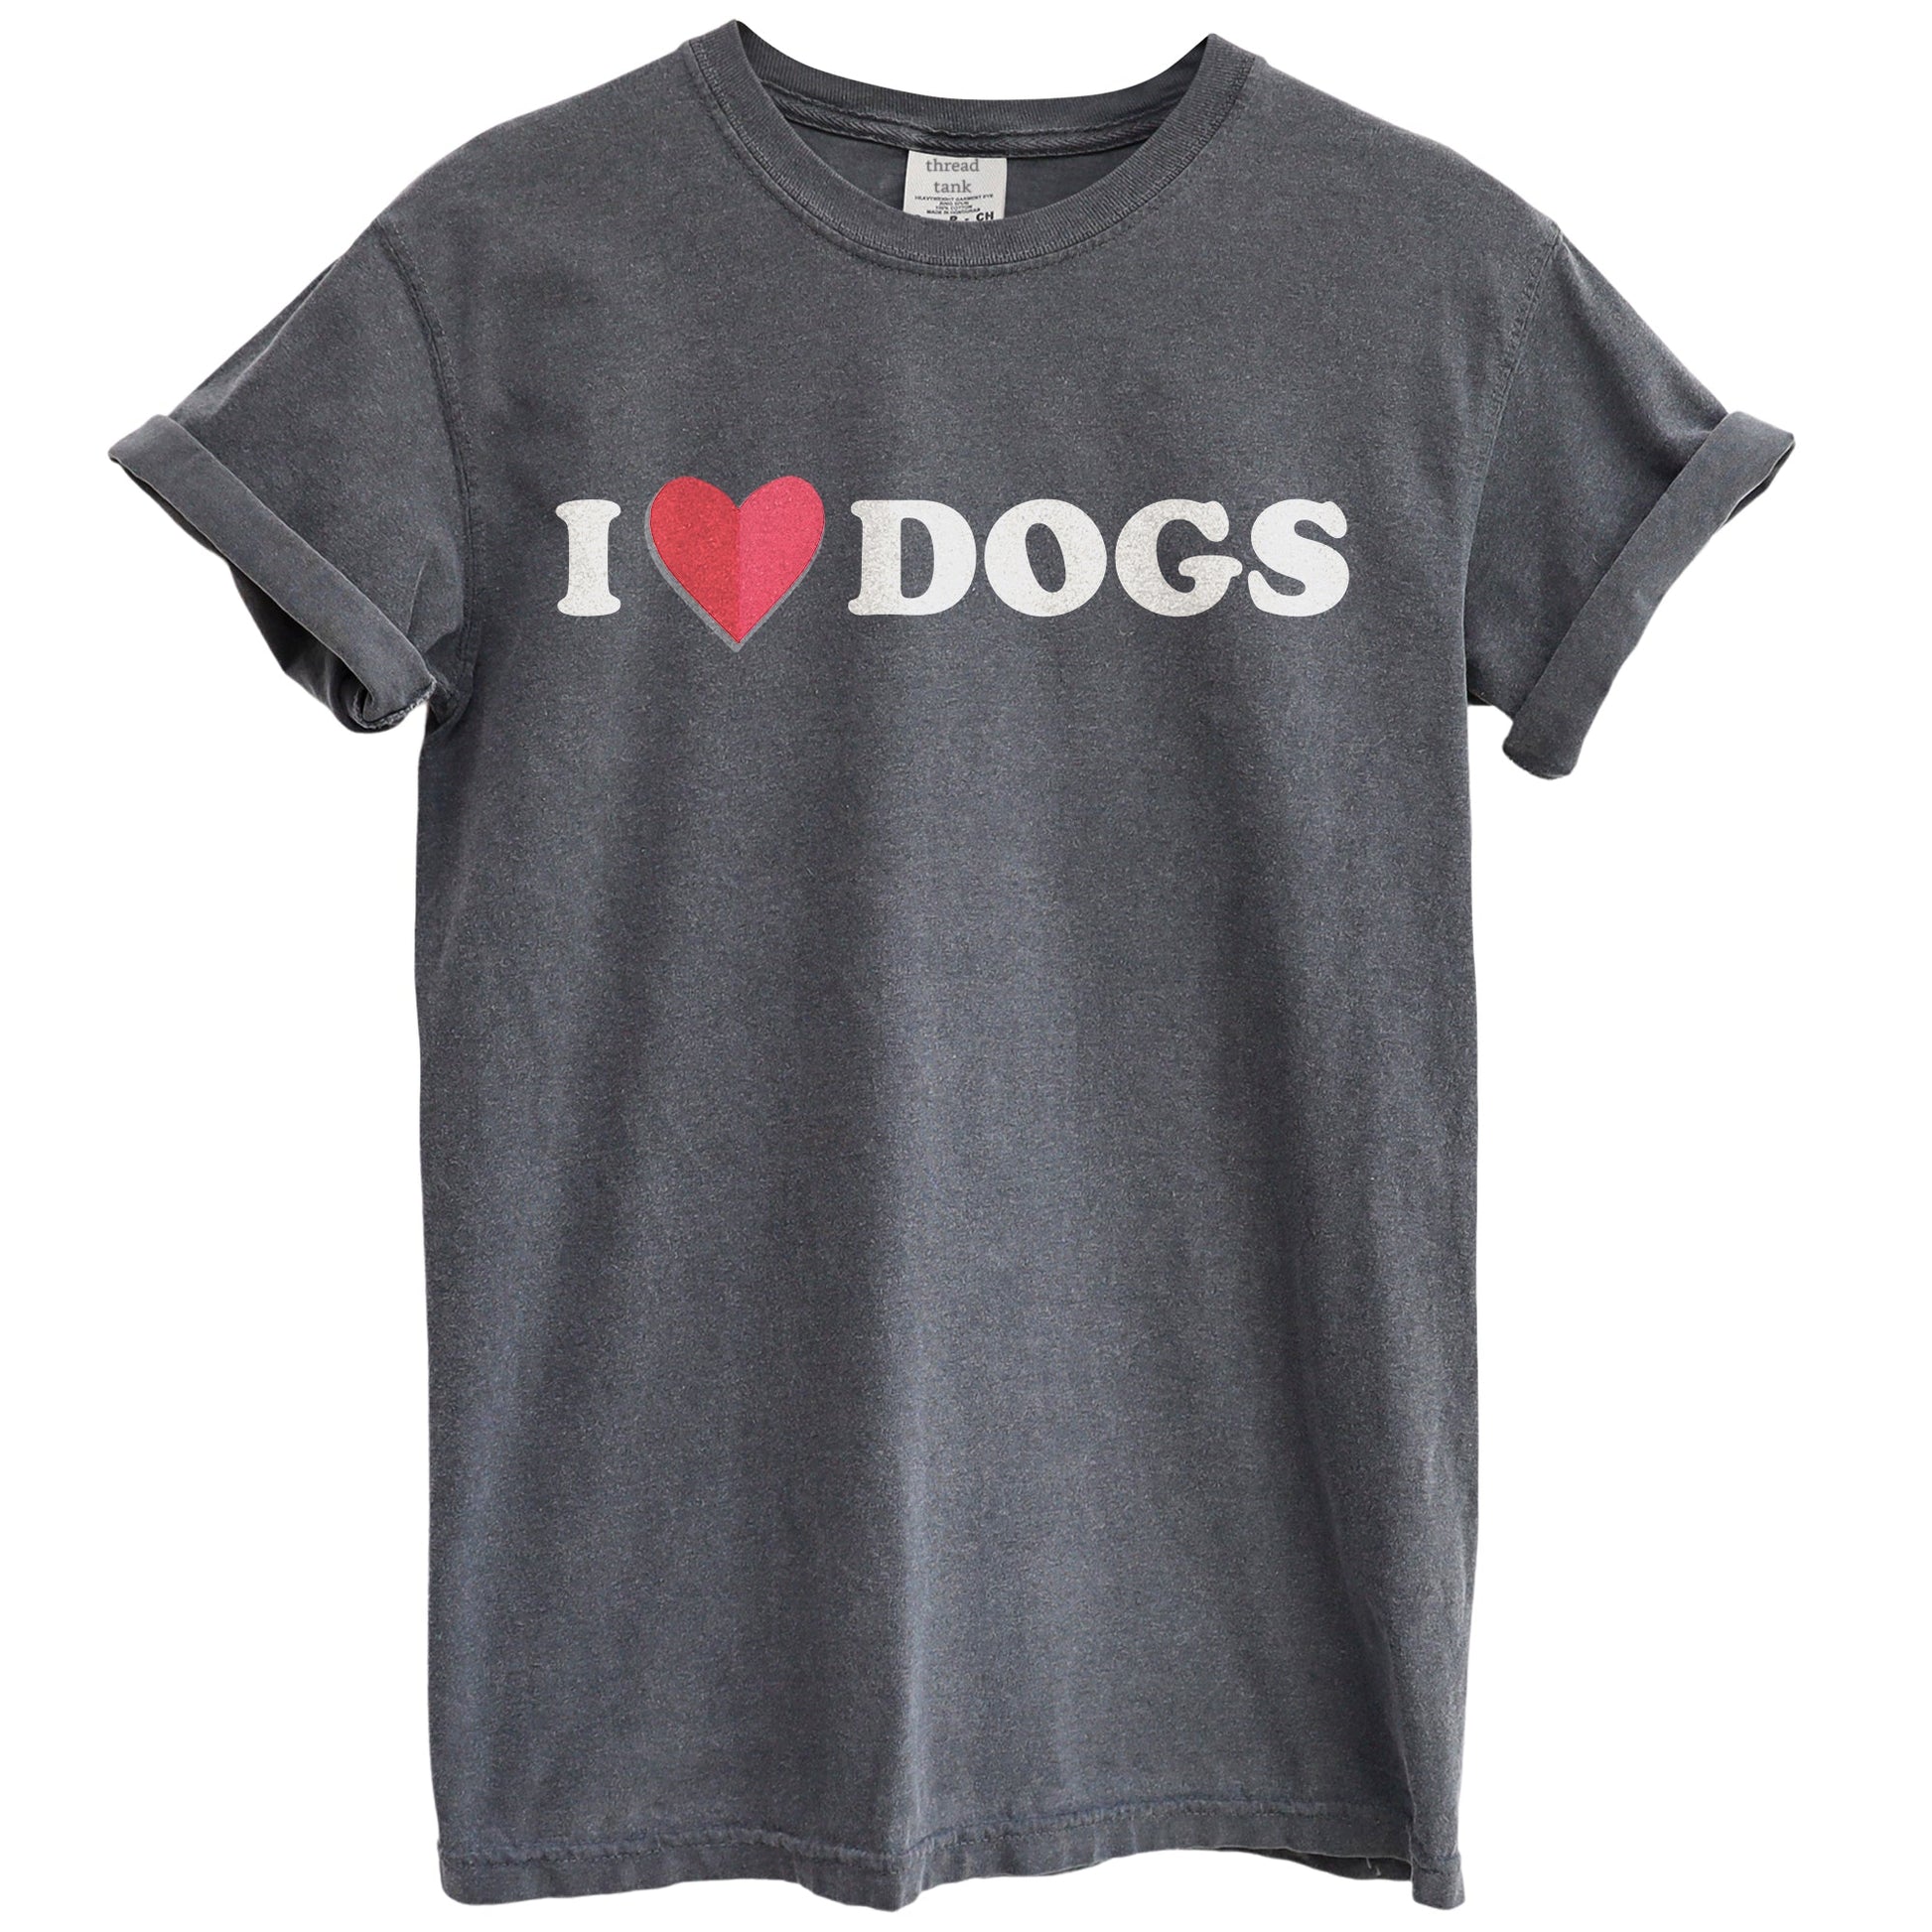 I Heart Dogs Garment-Dyed Tee - Stories You Can Wear